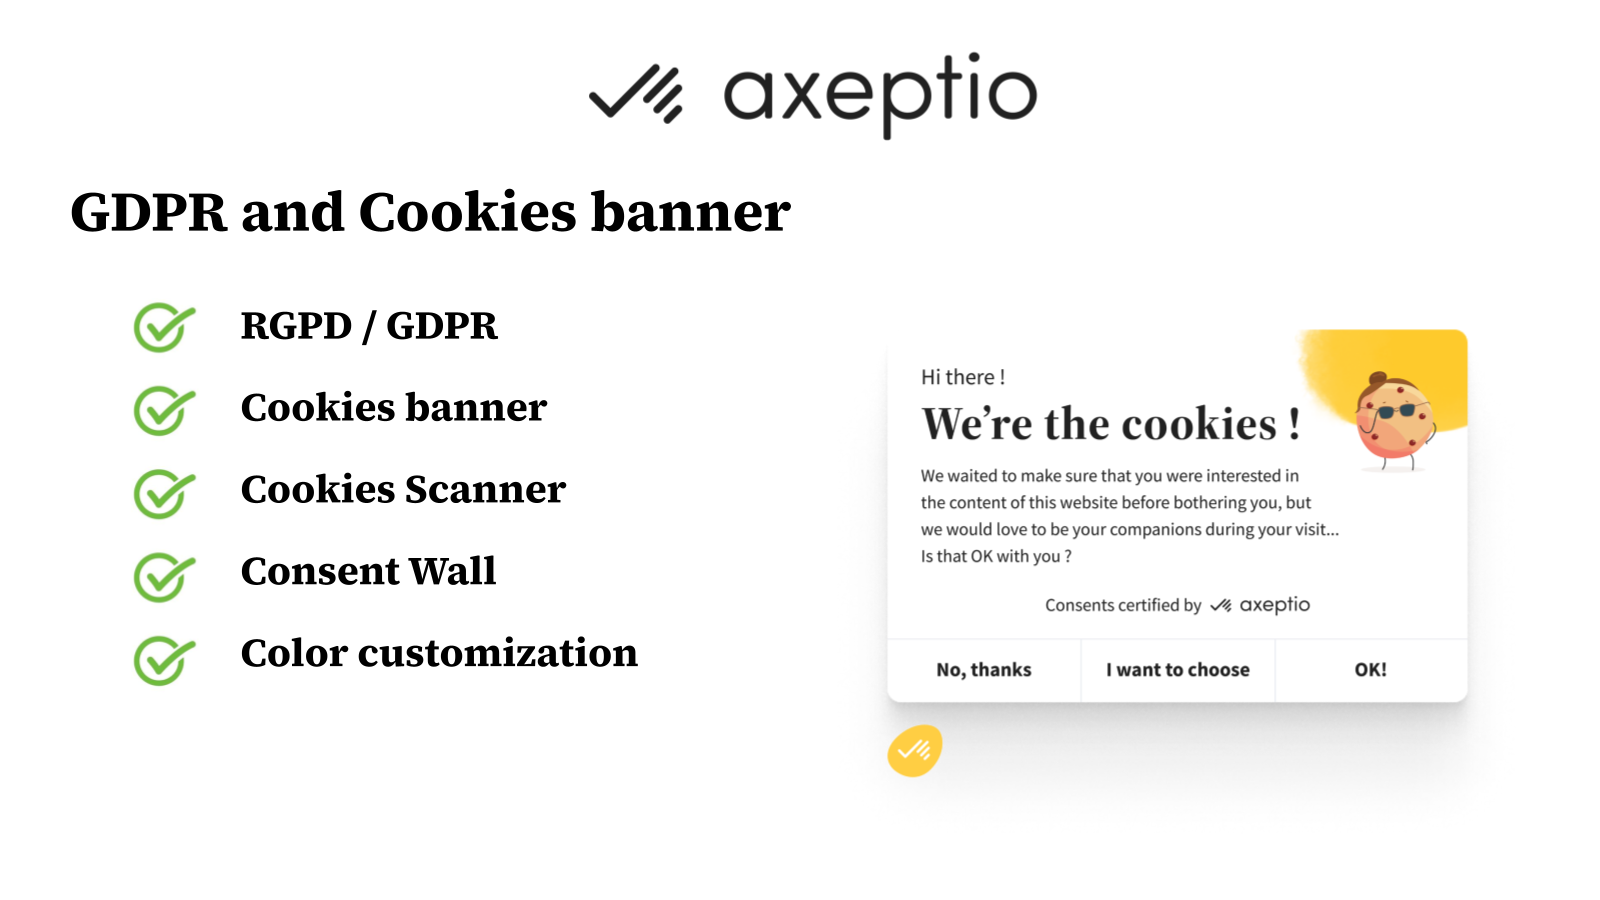 GDPR and cookies banner